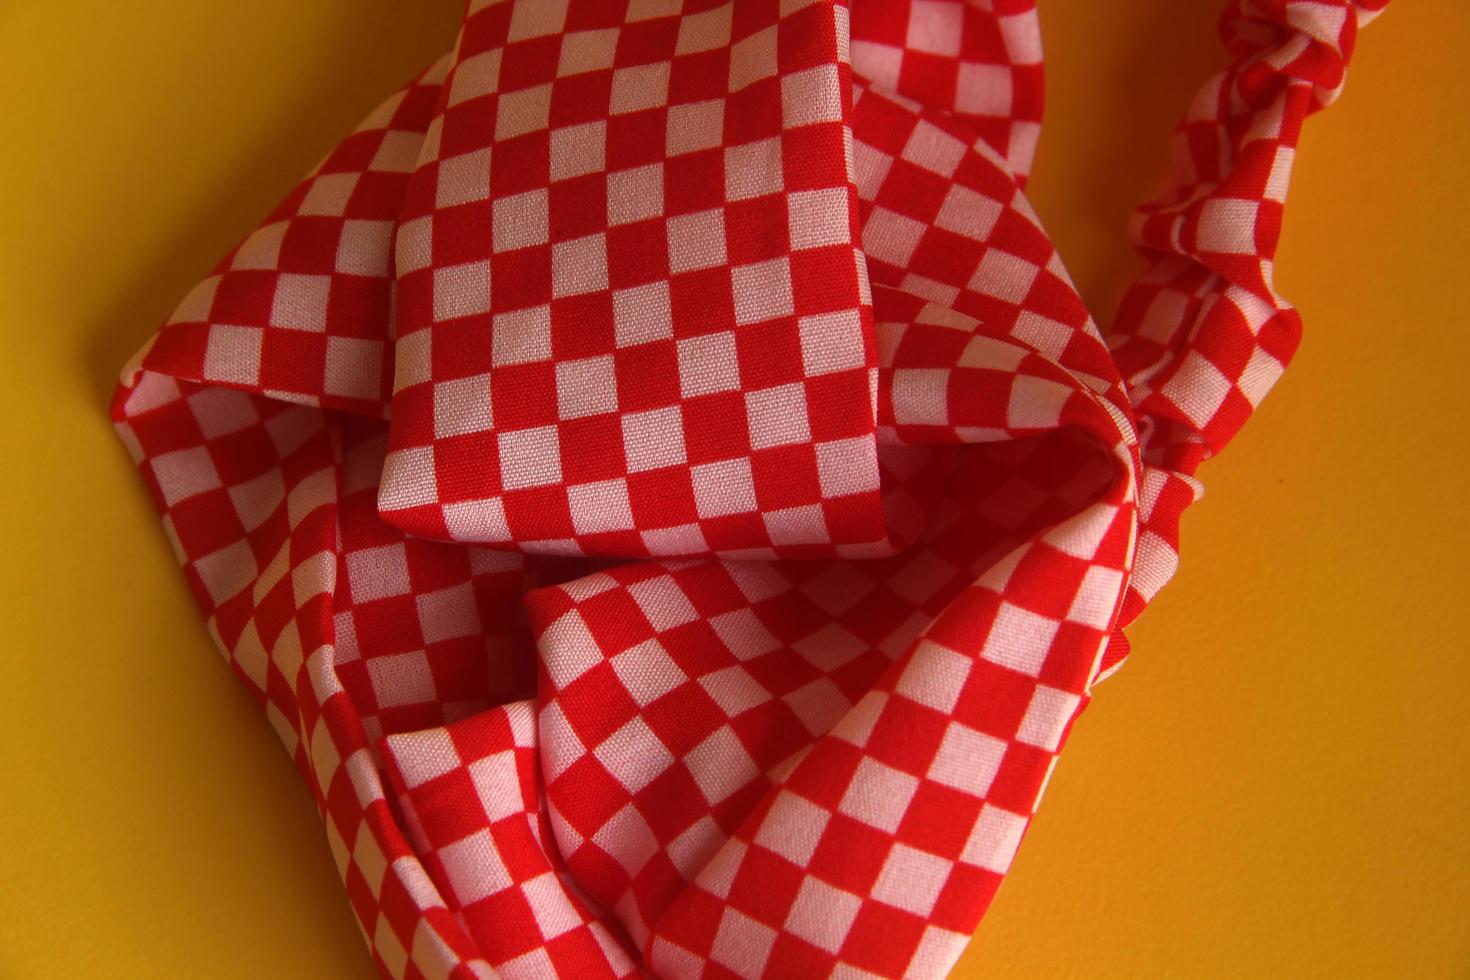 Cool red and white checkered pattern women hair accessories band. Fashion object photo isolated on yellow background.